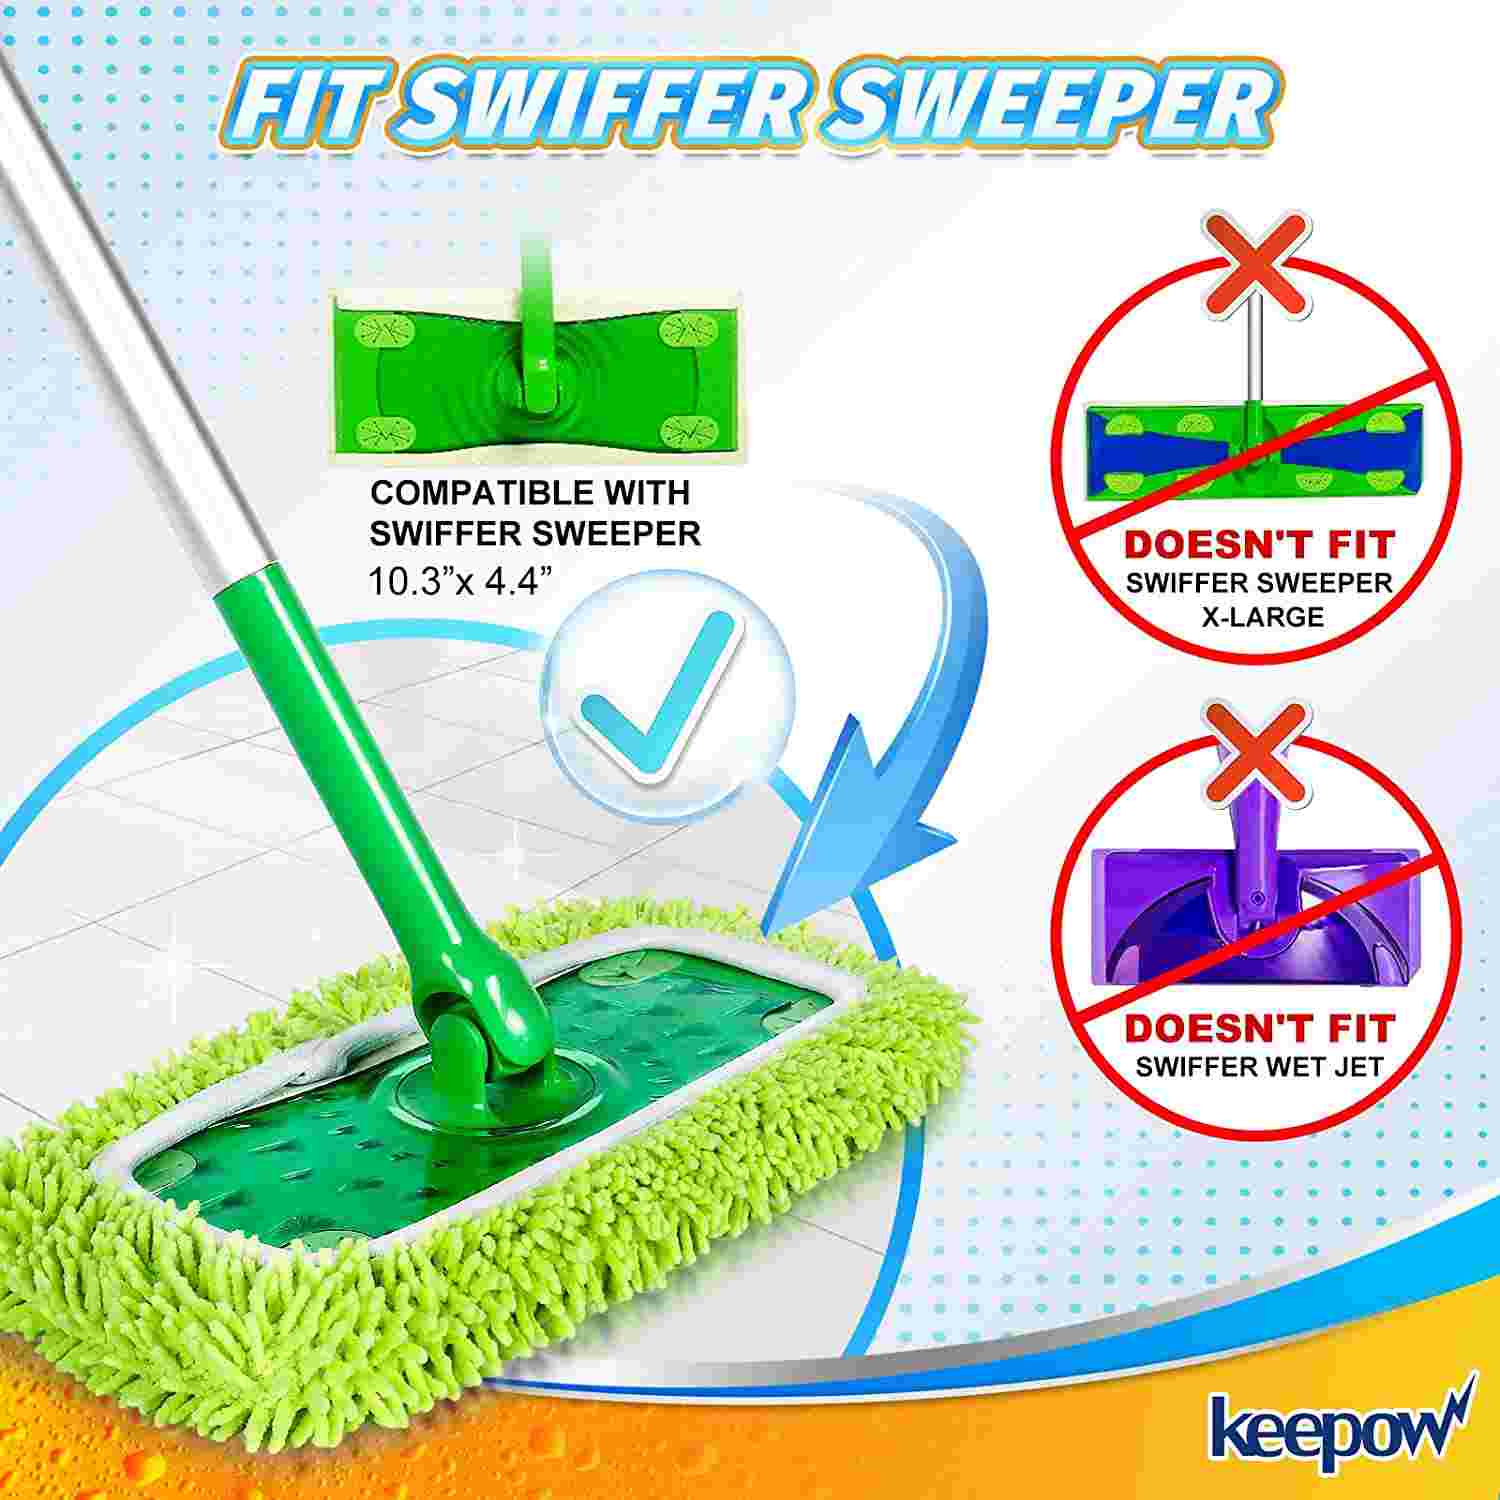 KEEPOW Dry Sweeping/Wet Mopping Cloths for Swiffer Sweeper